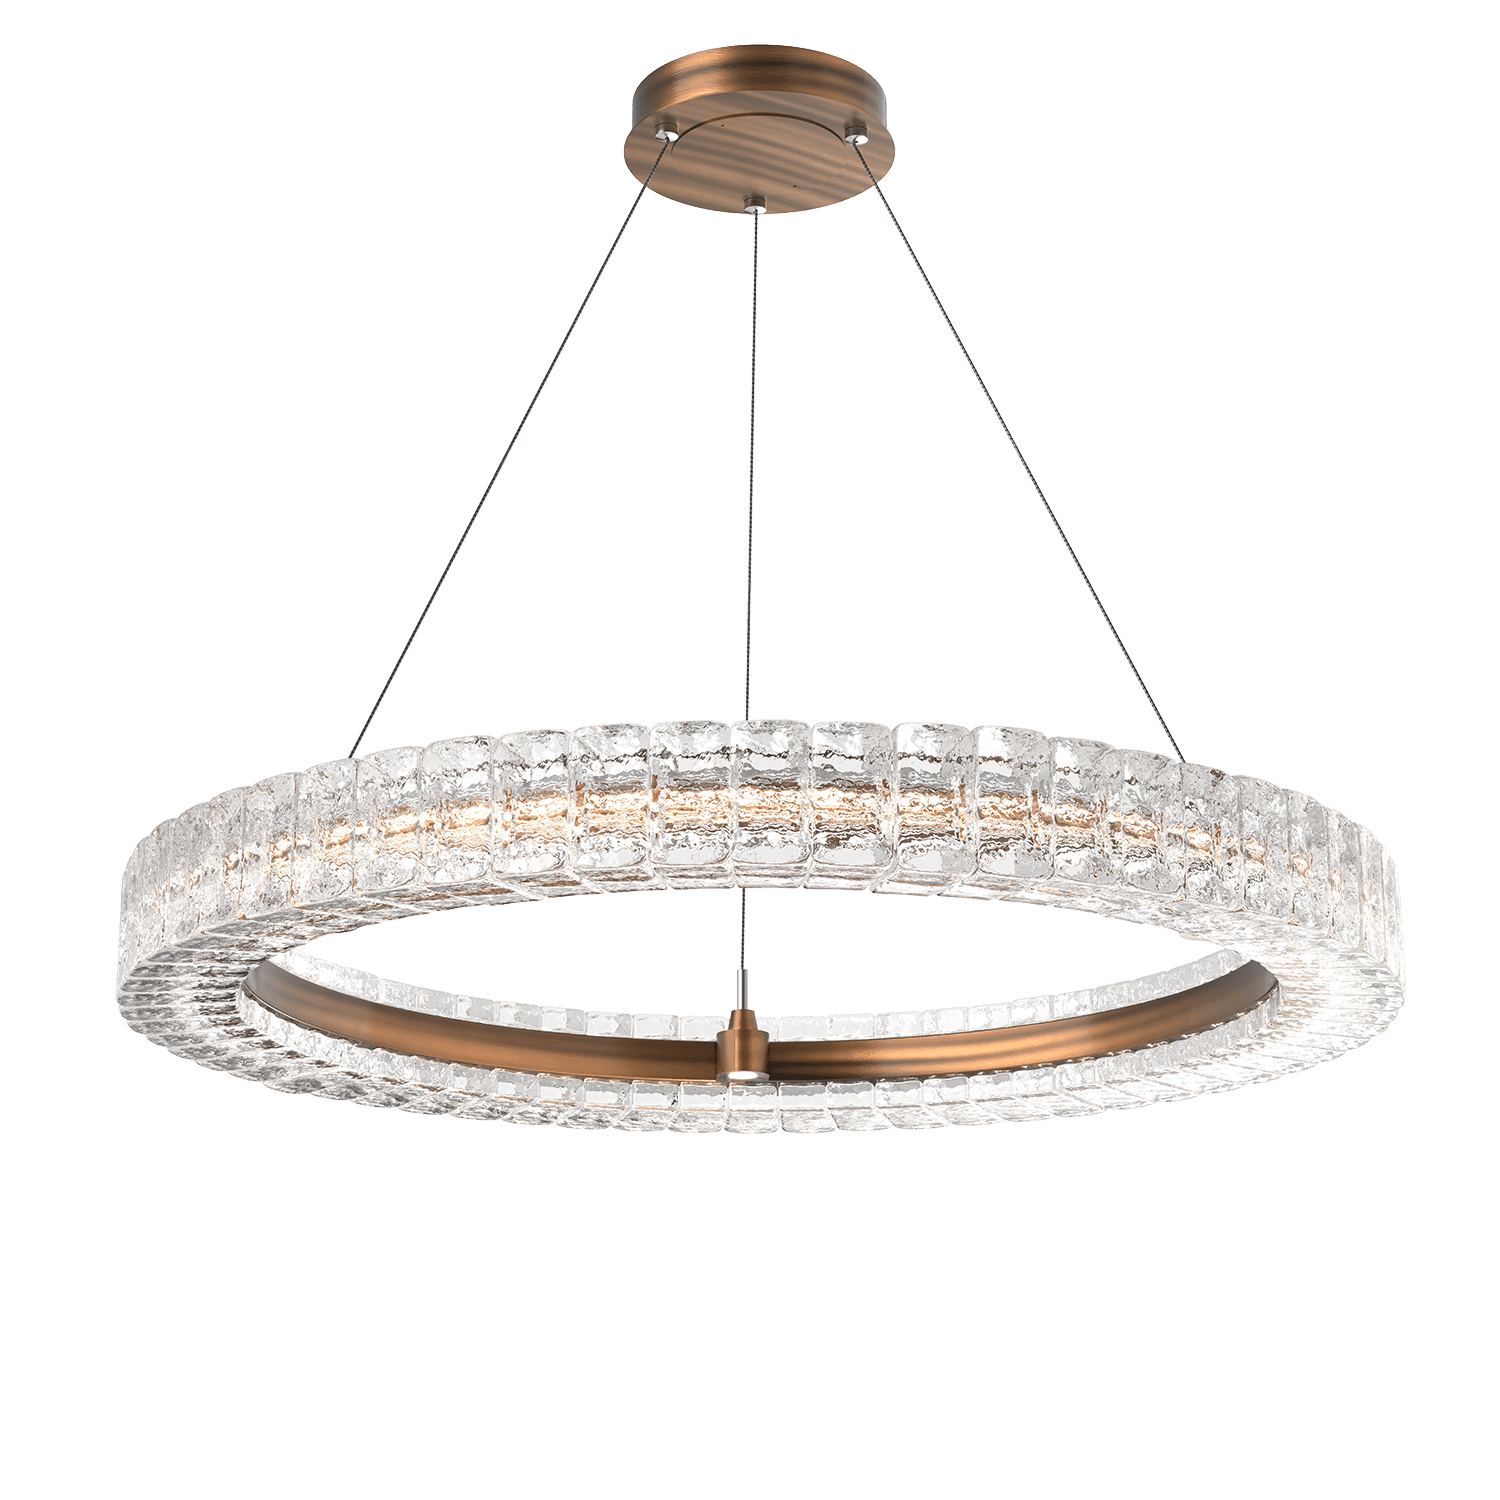 Buy CITRA 6 Light Gold Body Modern LED Ring Chandelier for Dining Living  Room Lamp - Warm White Online at Low Prices in India - Amazon.in